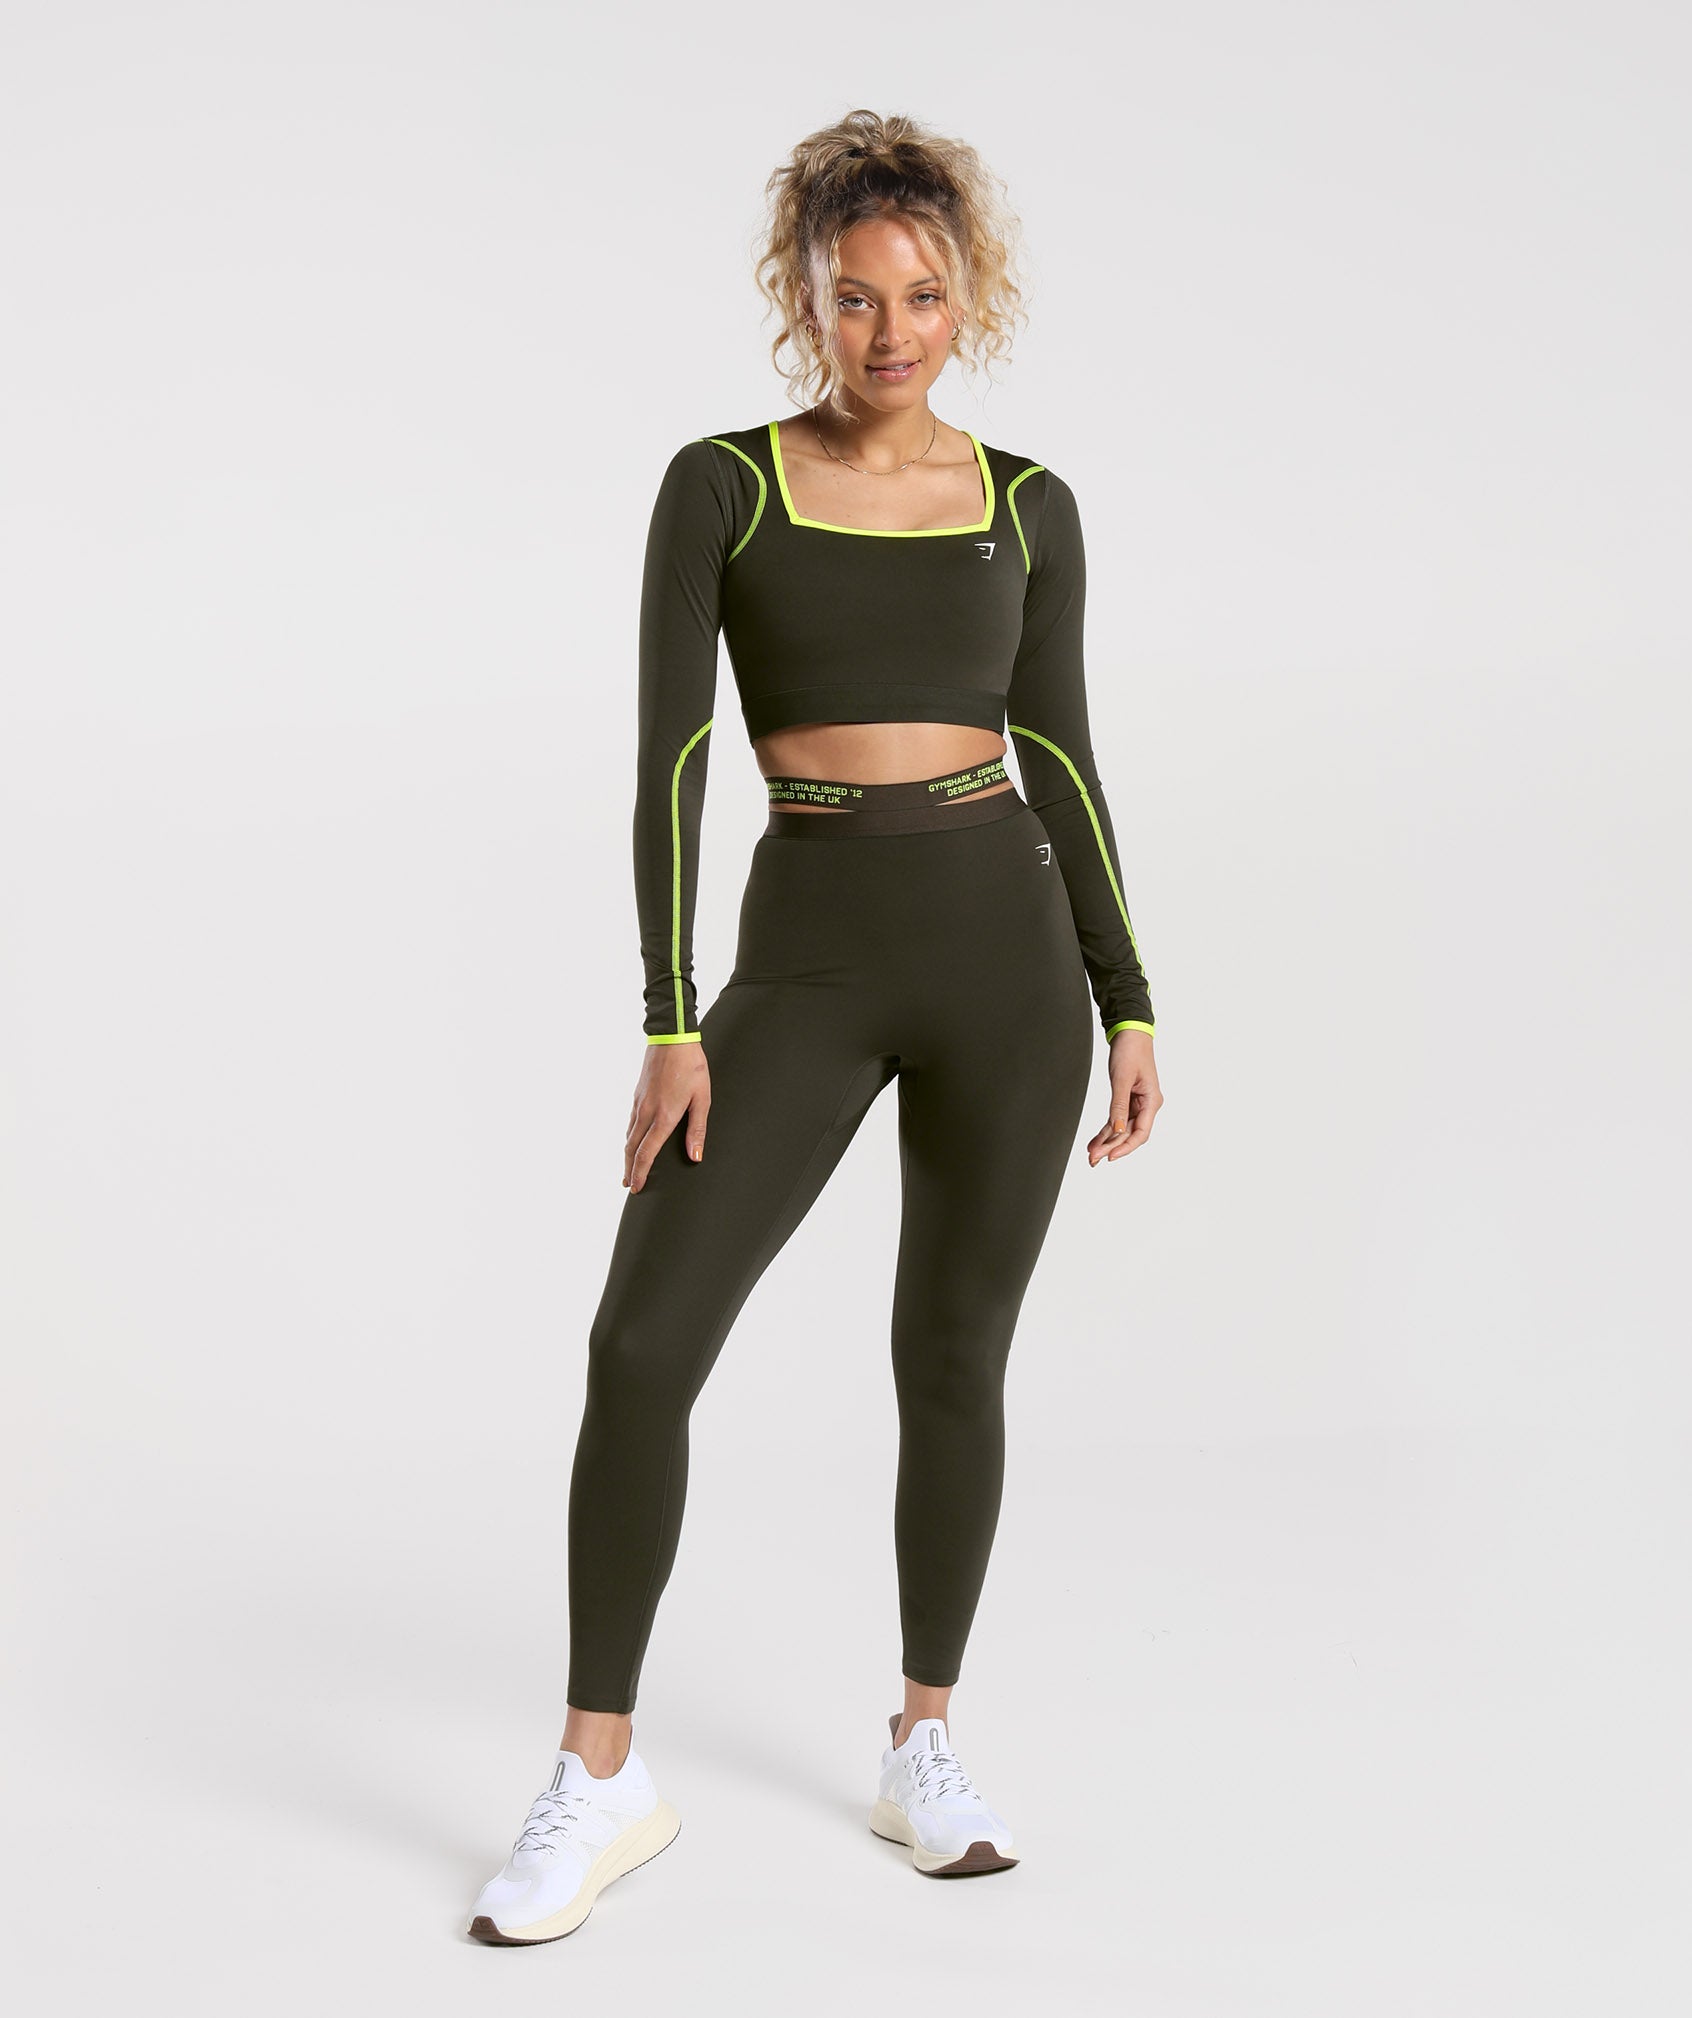 Contrast Long Sleeve Crop Top in Olive Green/Fluro Green - view 4